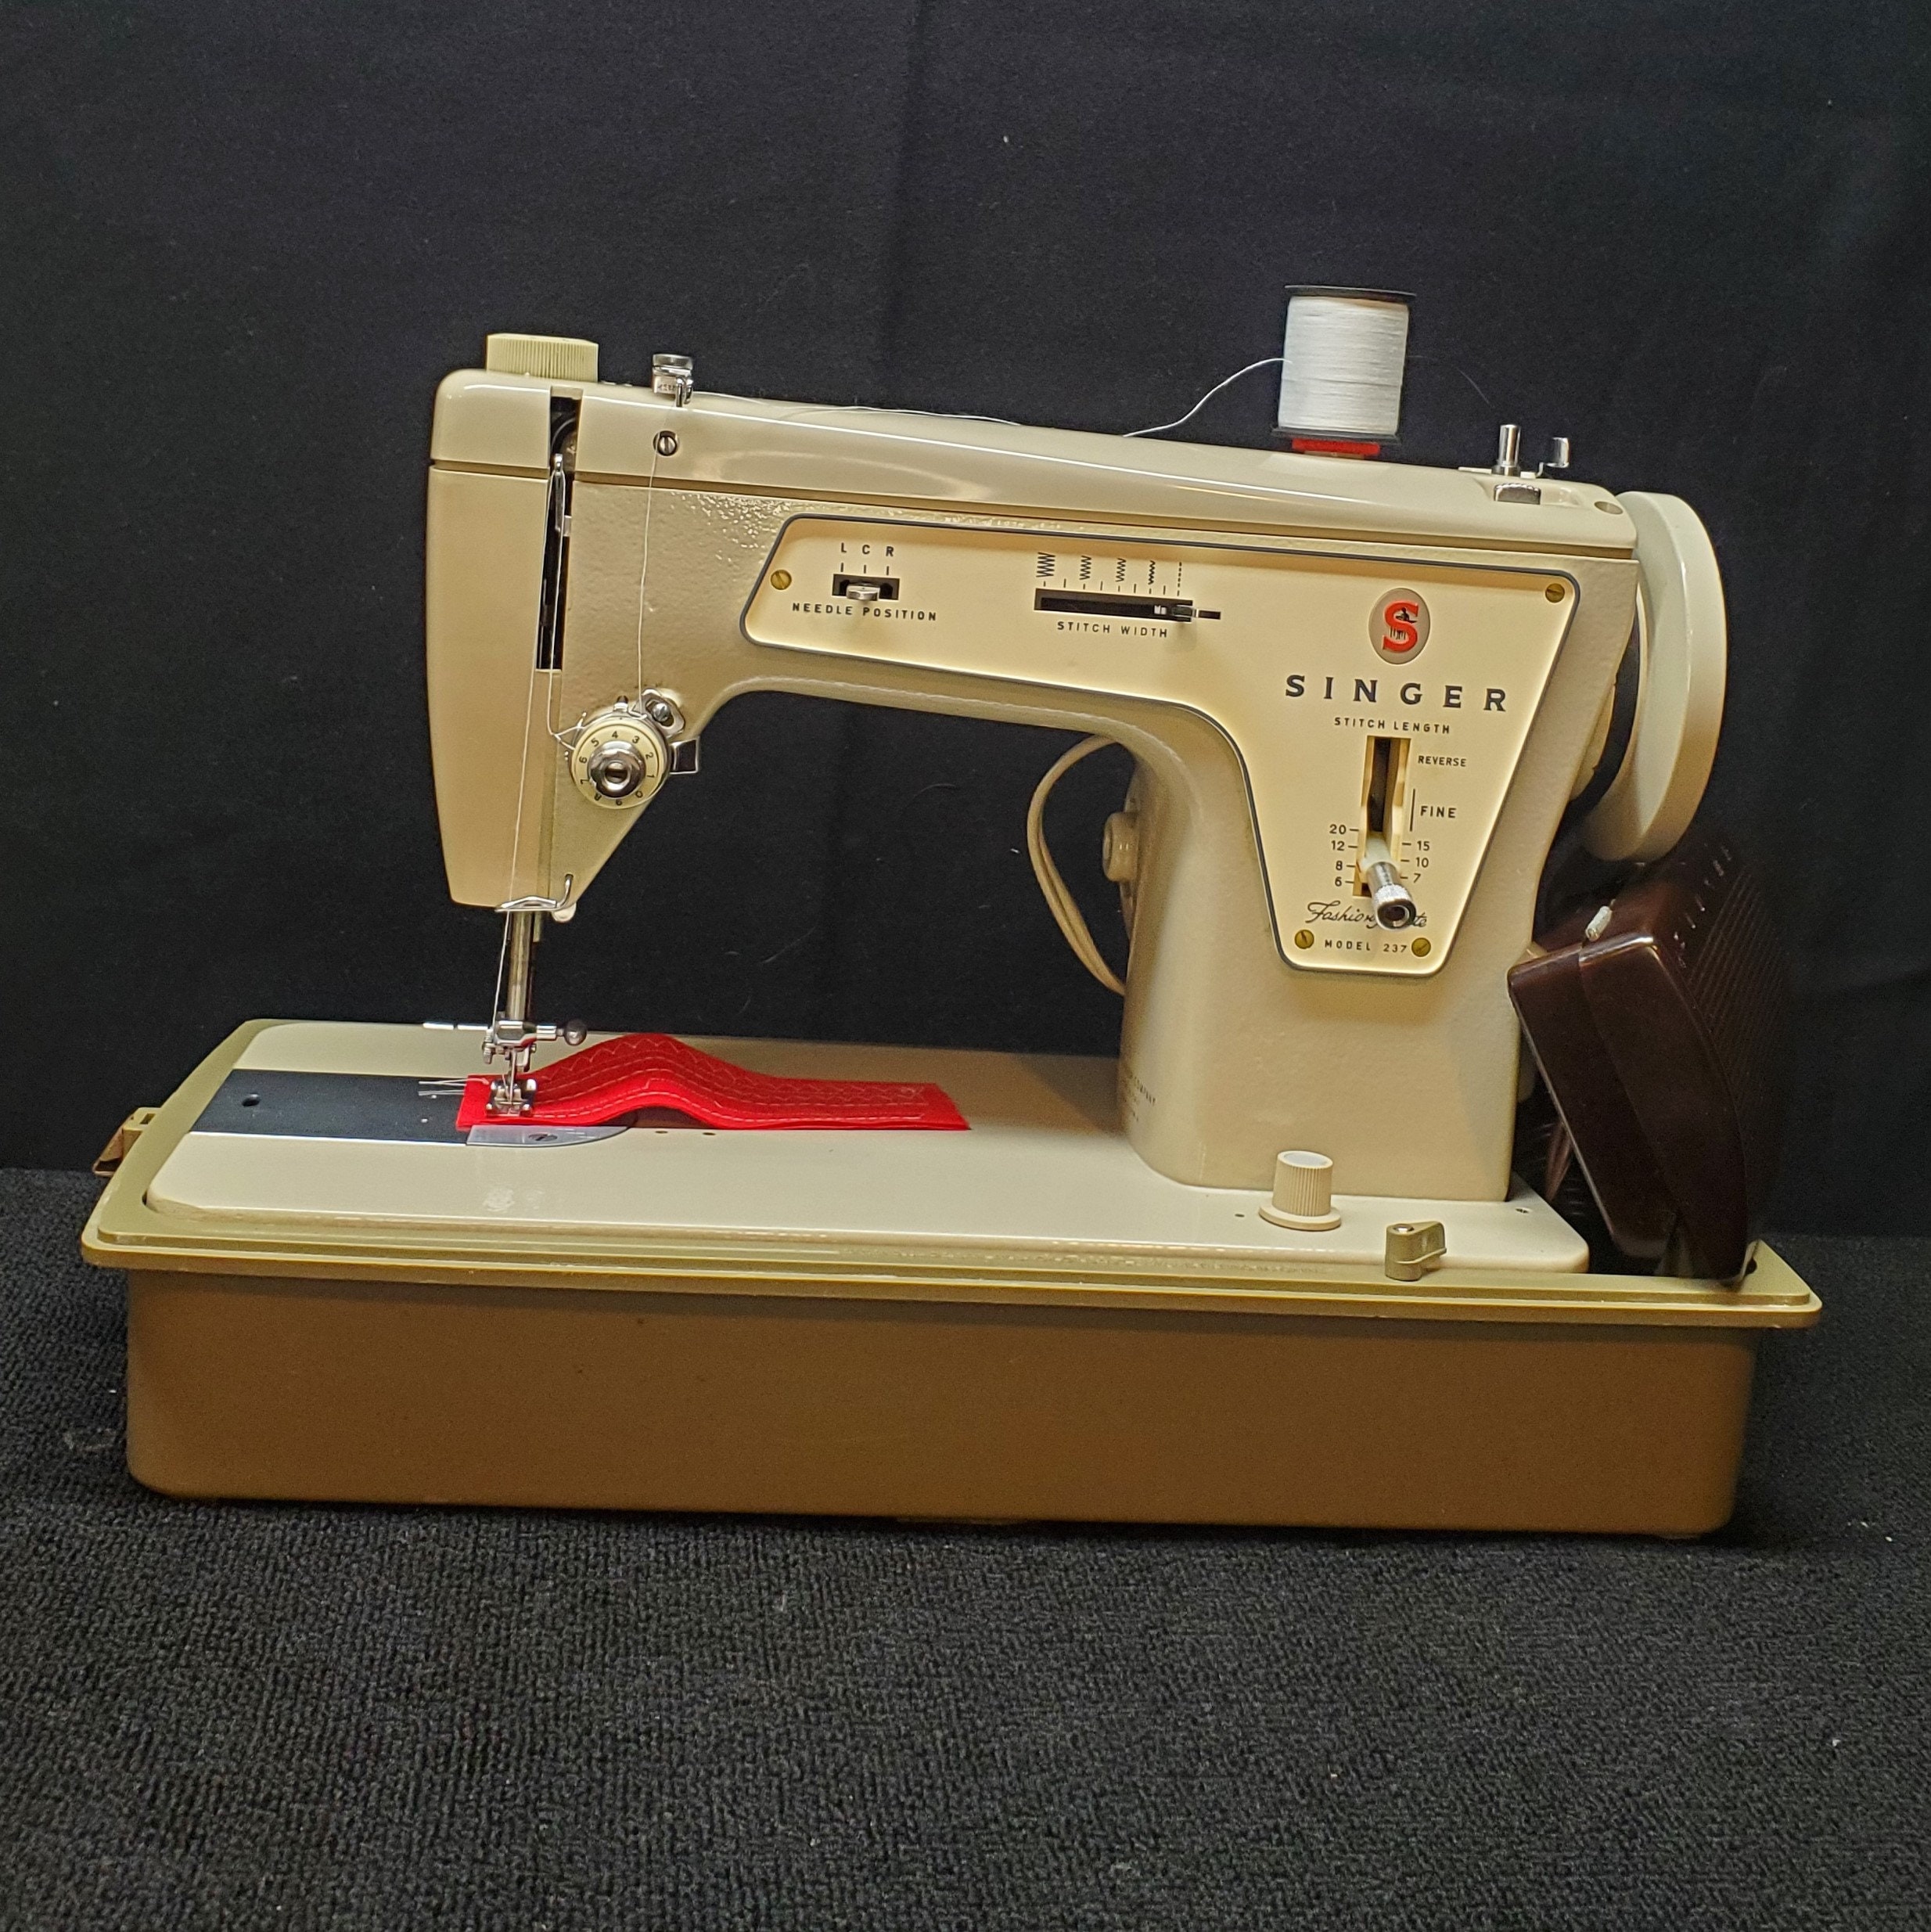 Brand New Spiegel Computerized Sewing Machine Model 60609 the Last Boxed  New Machine You Can Get in Box and Well Packed for Xmas and to Gift 